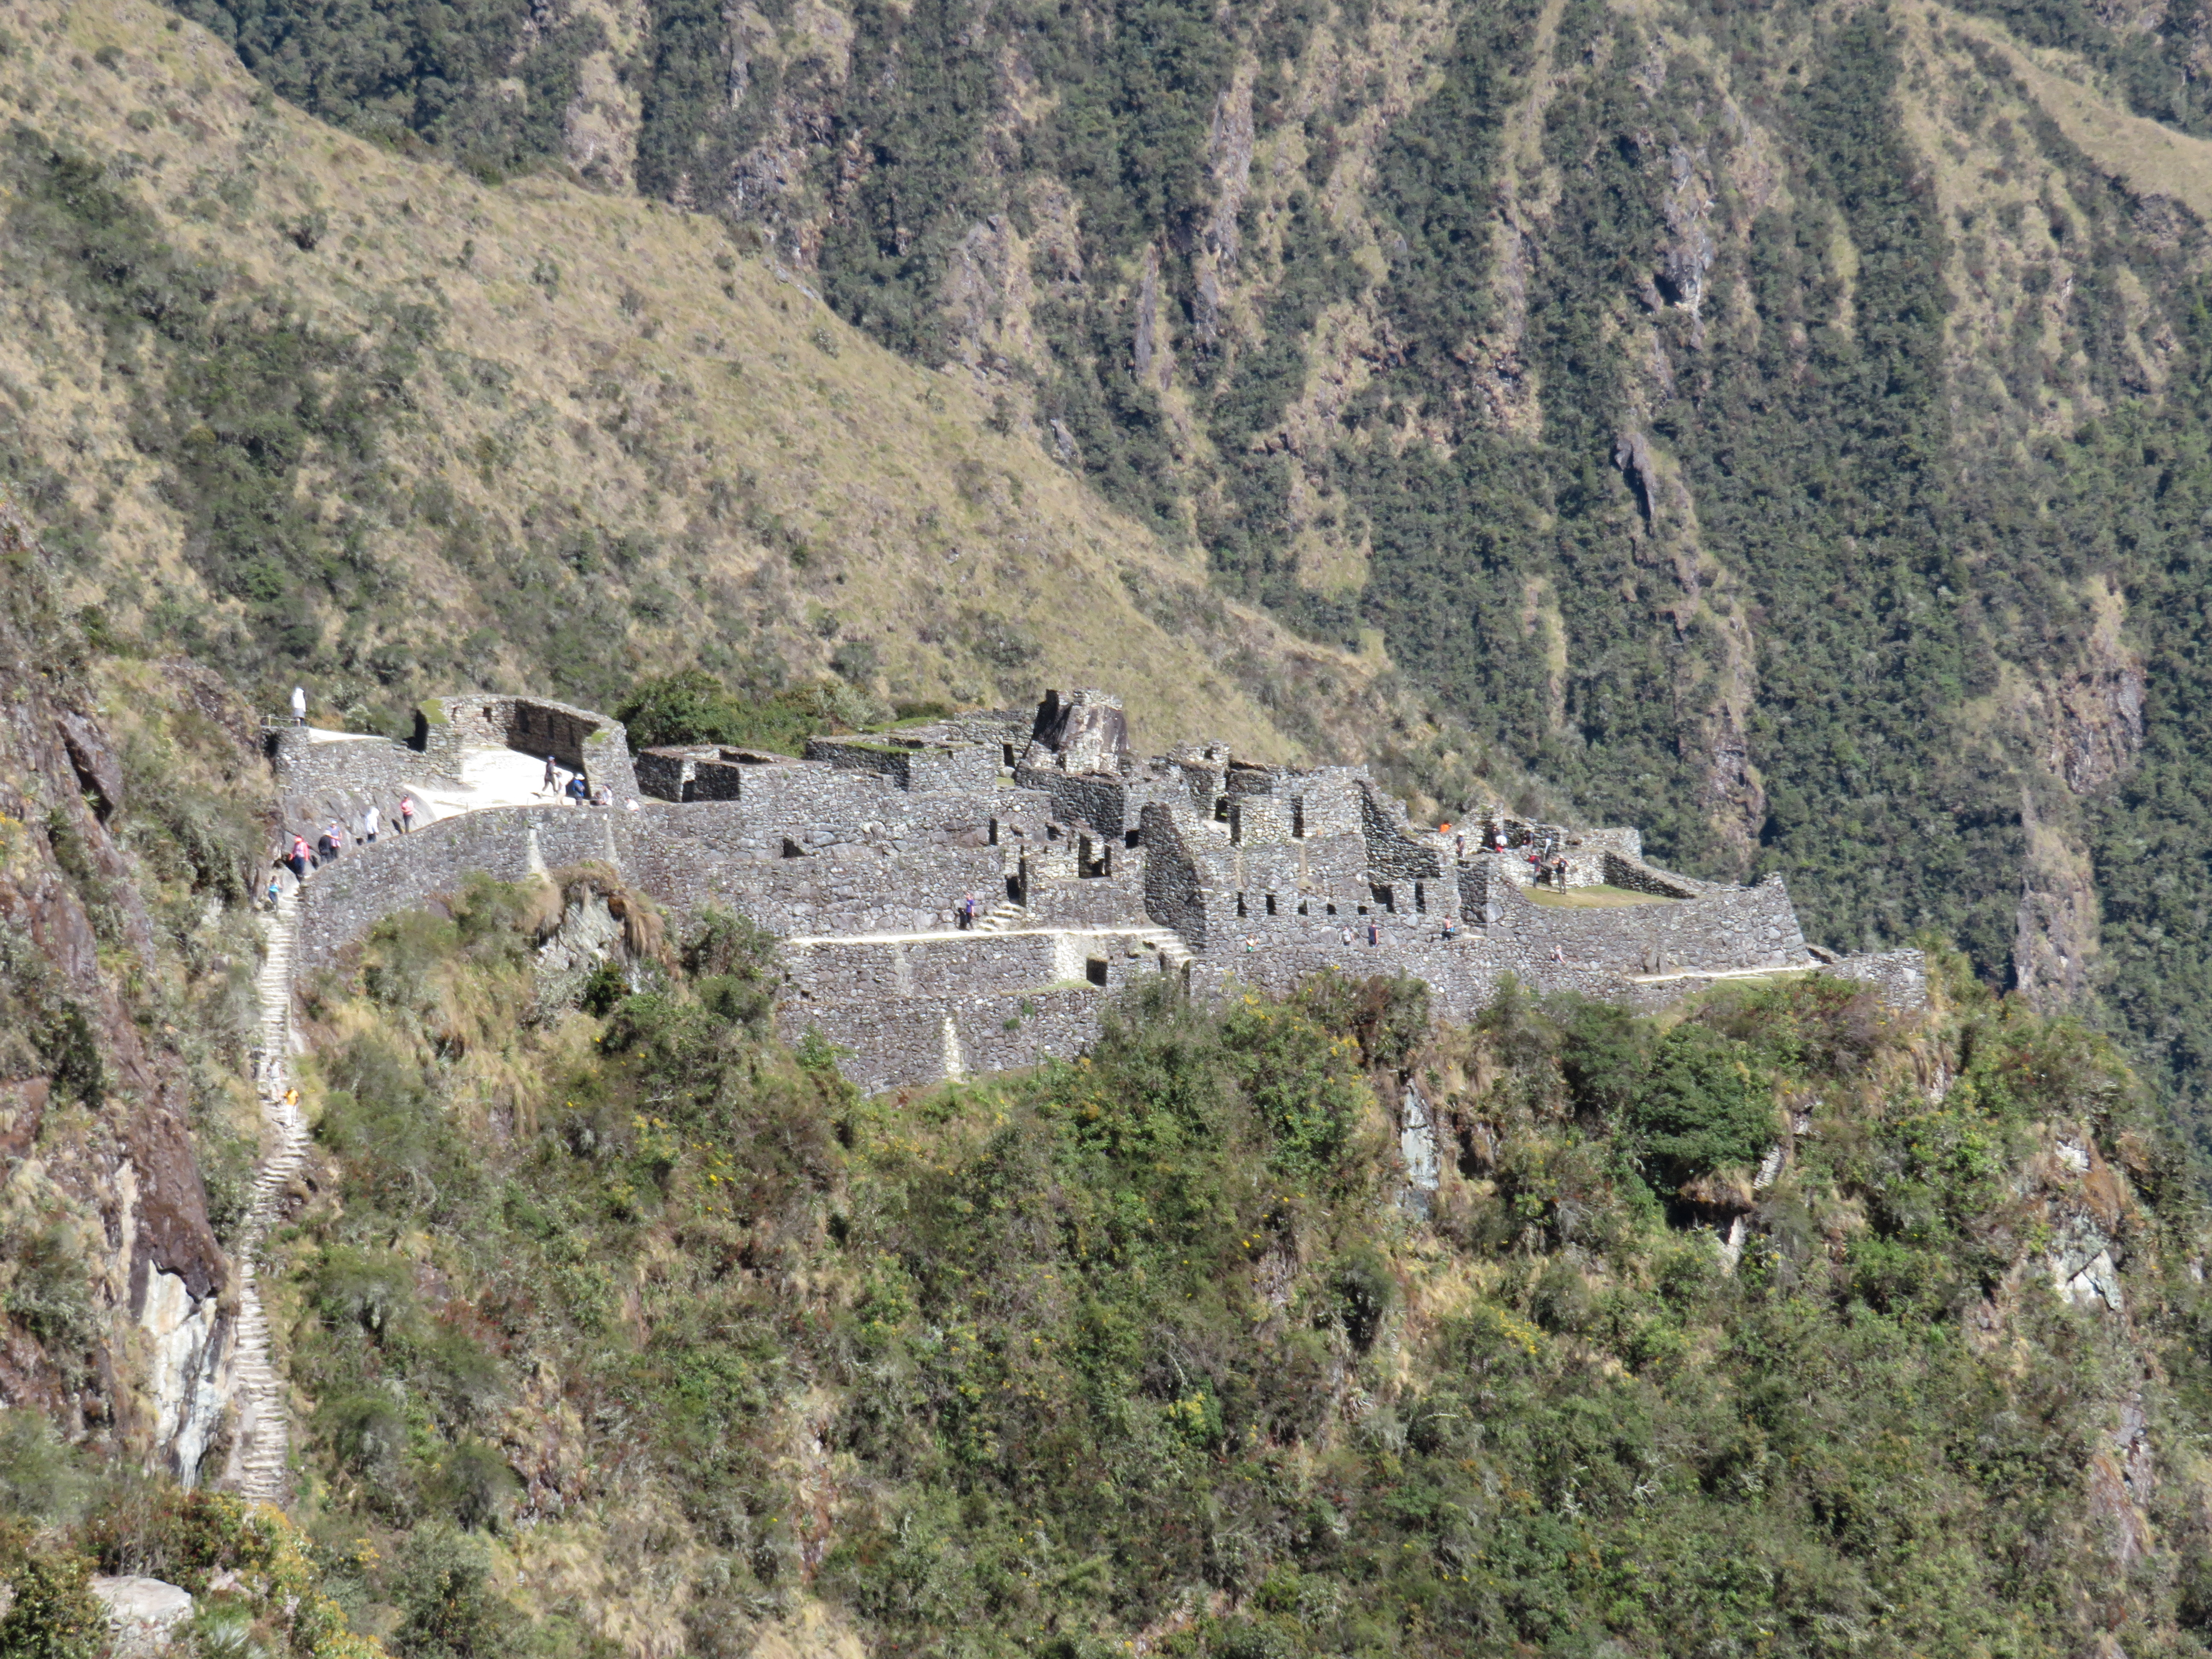 One of the Many Sites on the Inca Trail to Machu PIcchu